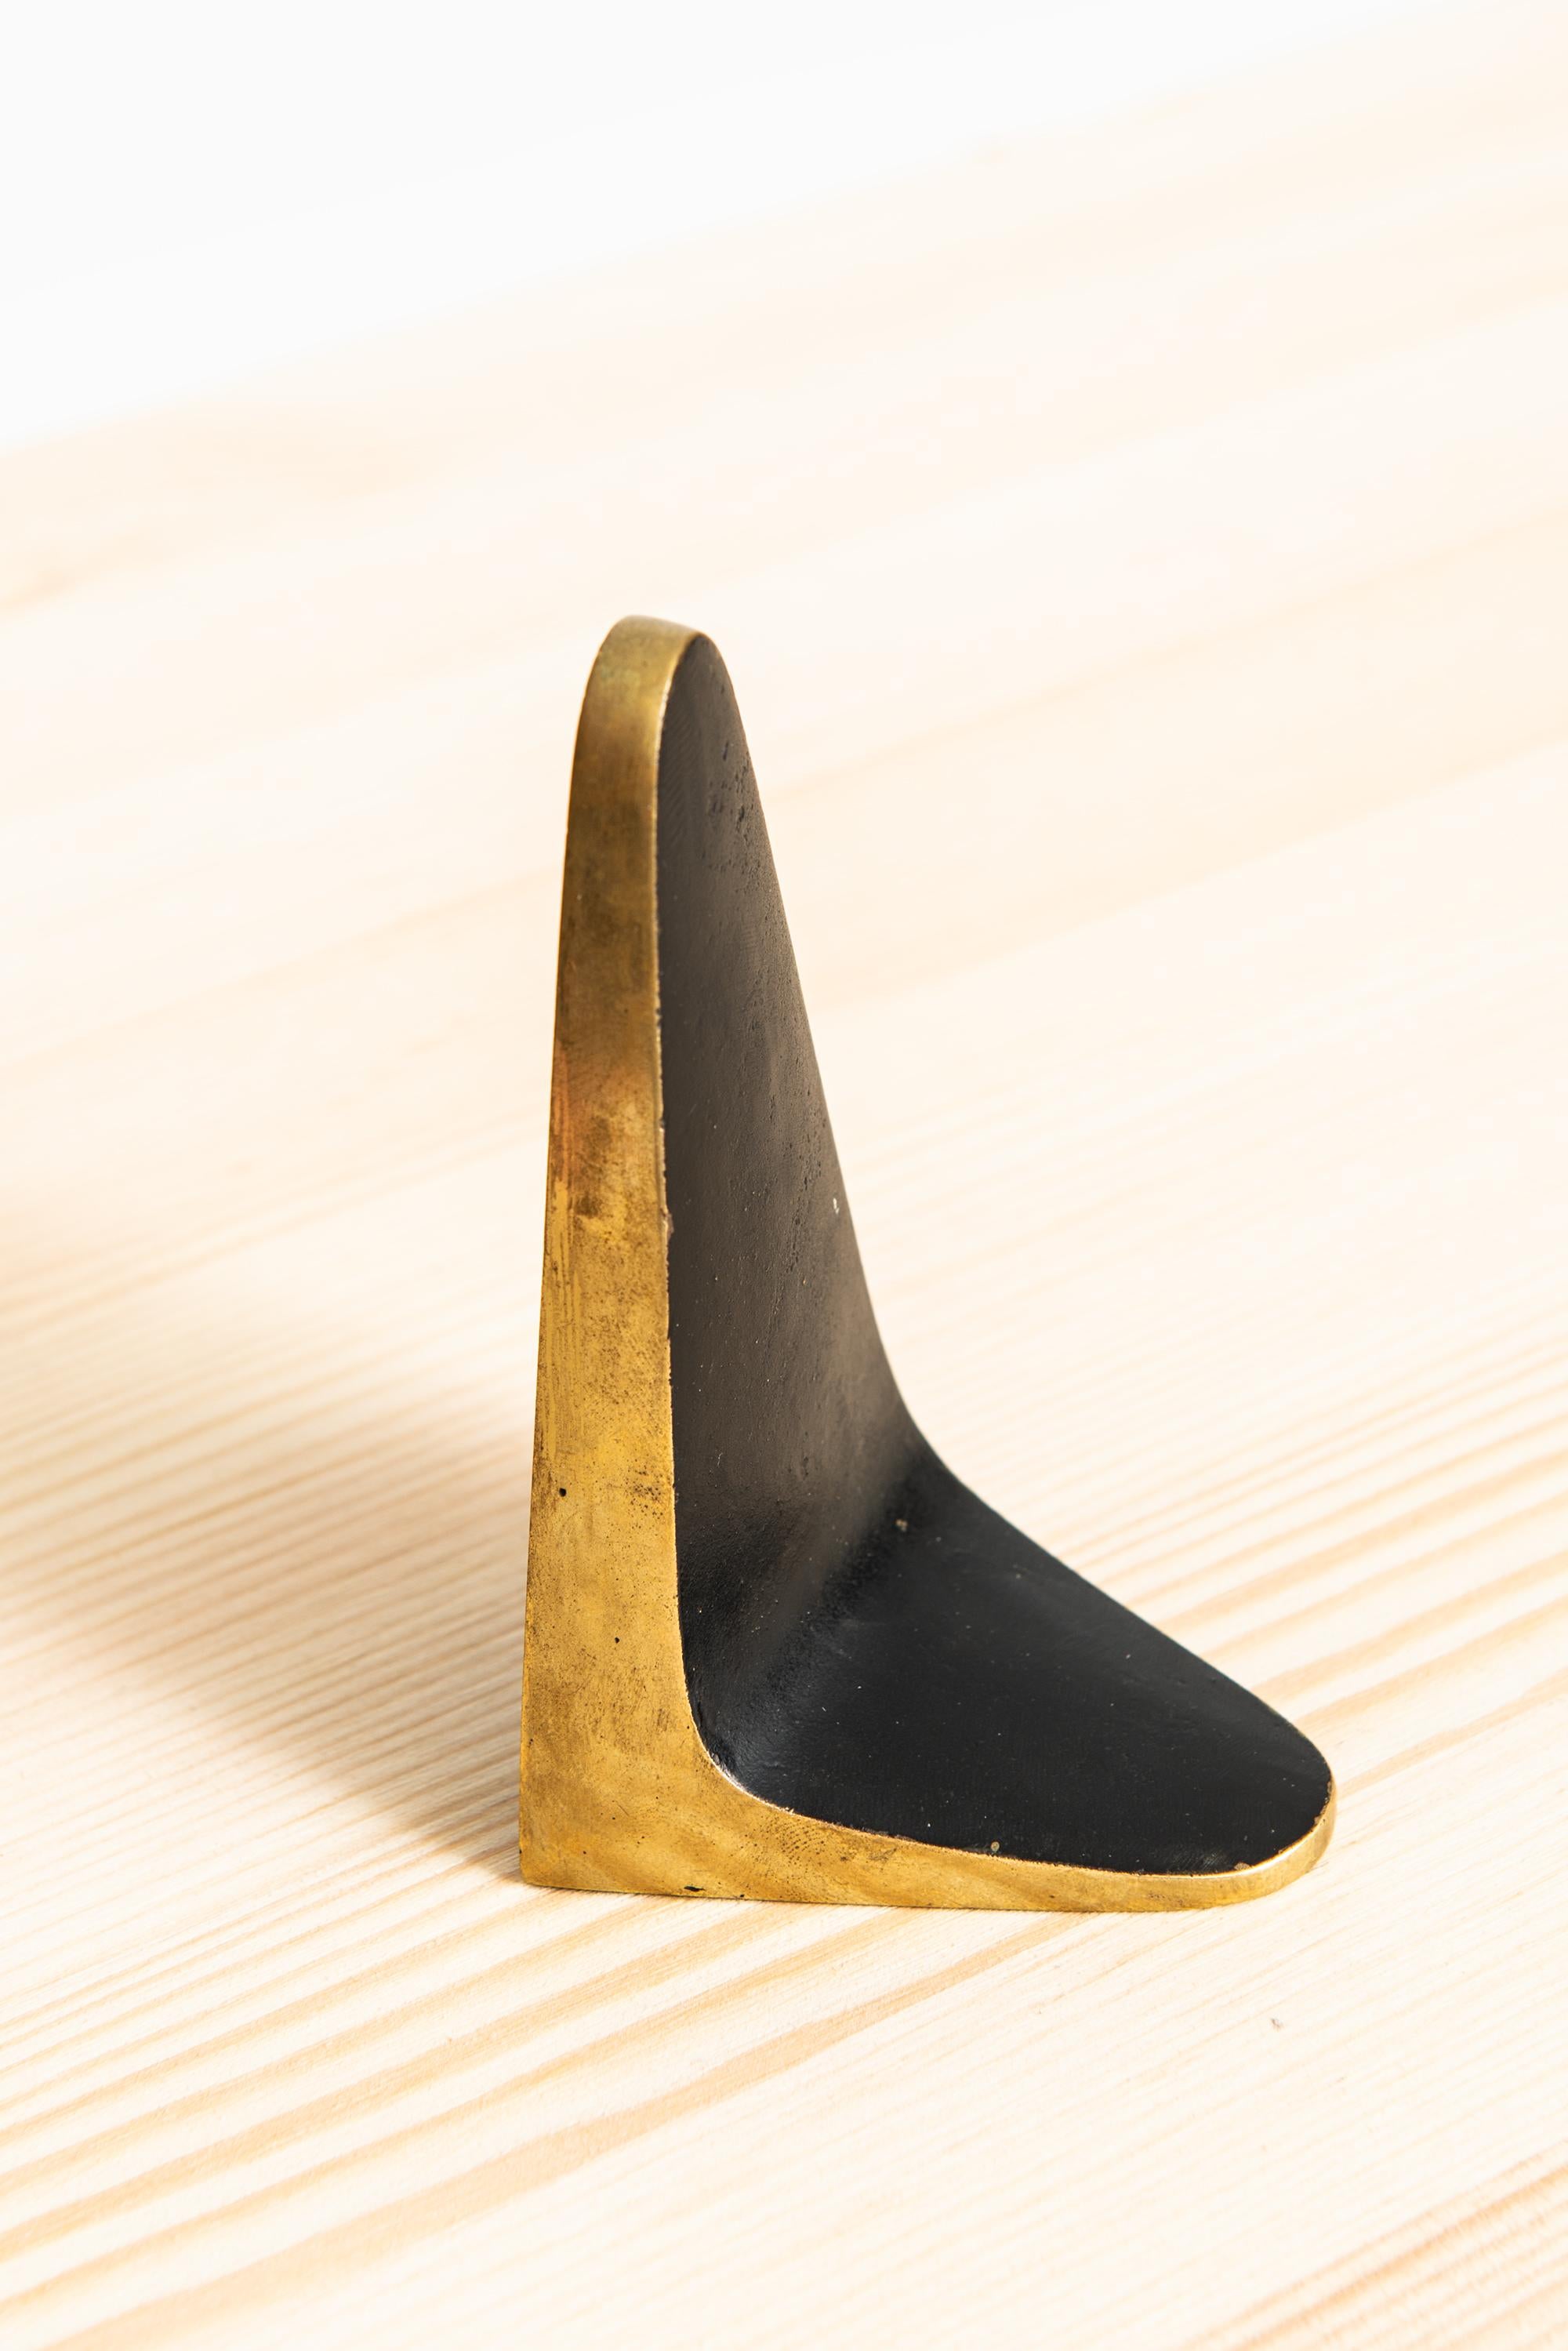 Rare bookend in brass attributed to Carl Auböck. Produced and stamped by Illum Bolighus in Denmark.